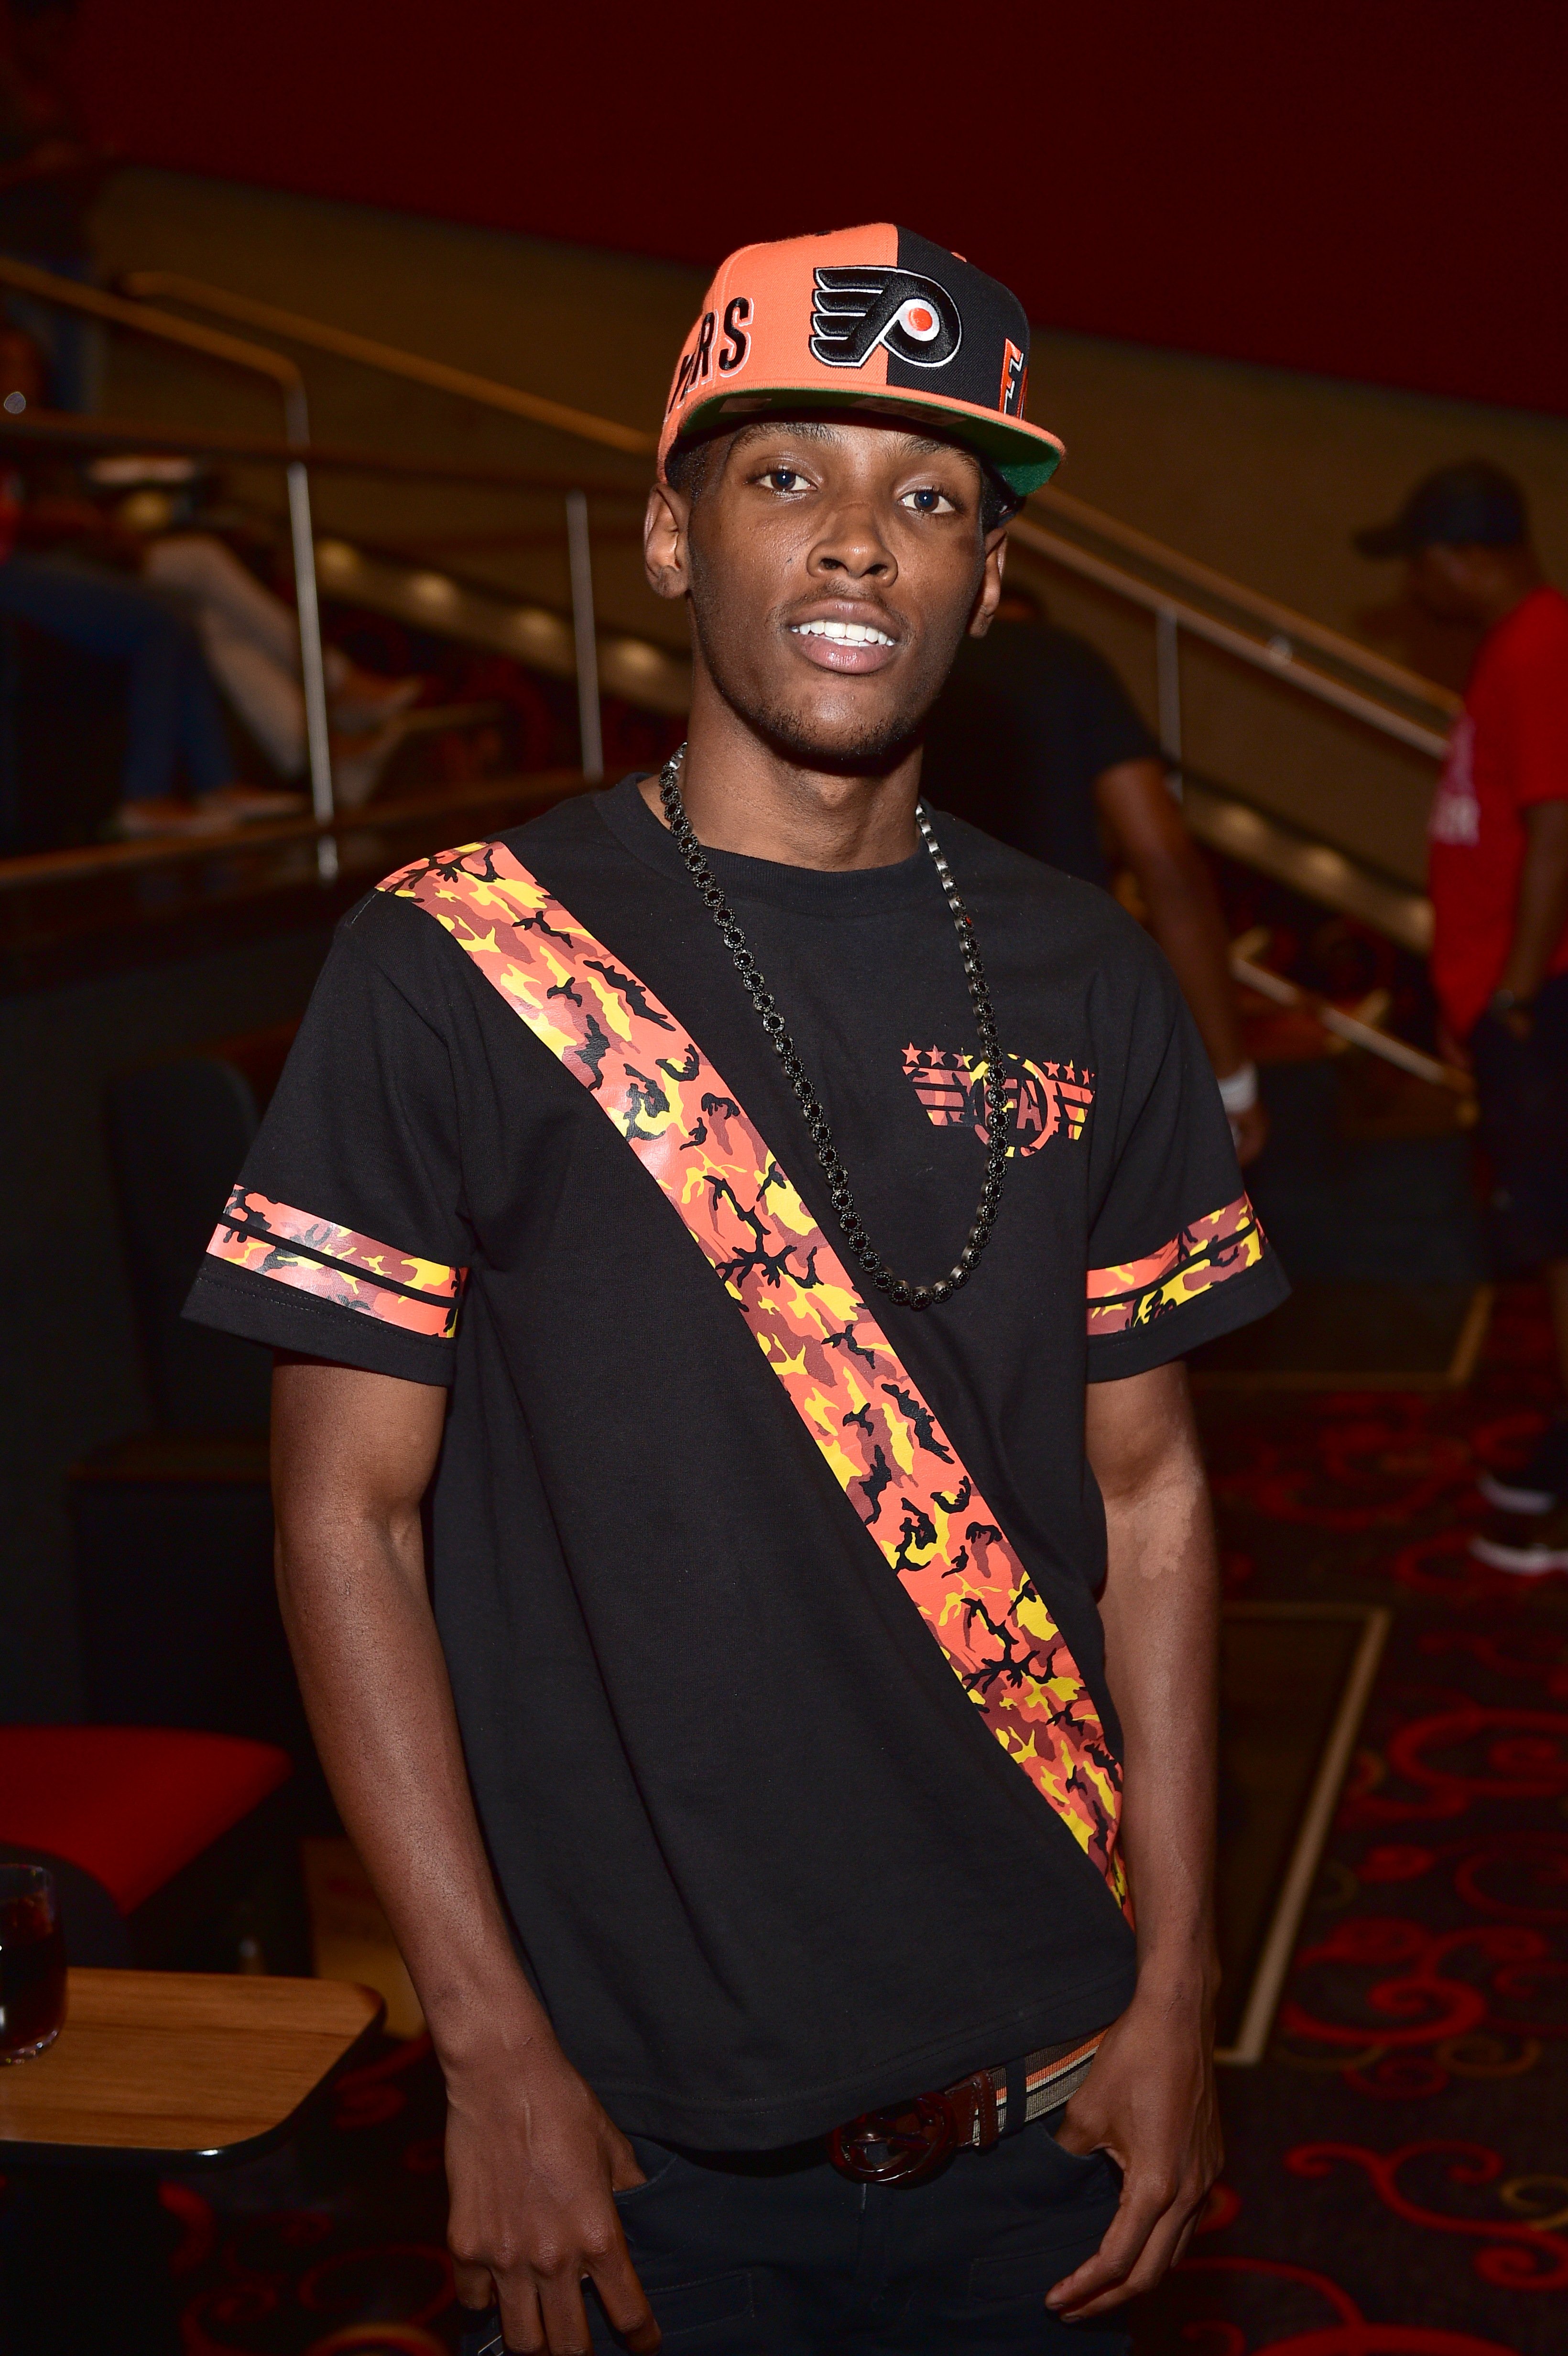 Jadarius Jenkins is pictured at the "Vacation" VIP Reception/Movie Screening Hosted By Bossip And Ryan Cameron at Regal Atlantic Station on July 27, 2015, in Atlanta, Georgia | Source: Getty Images